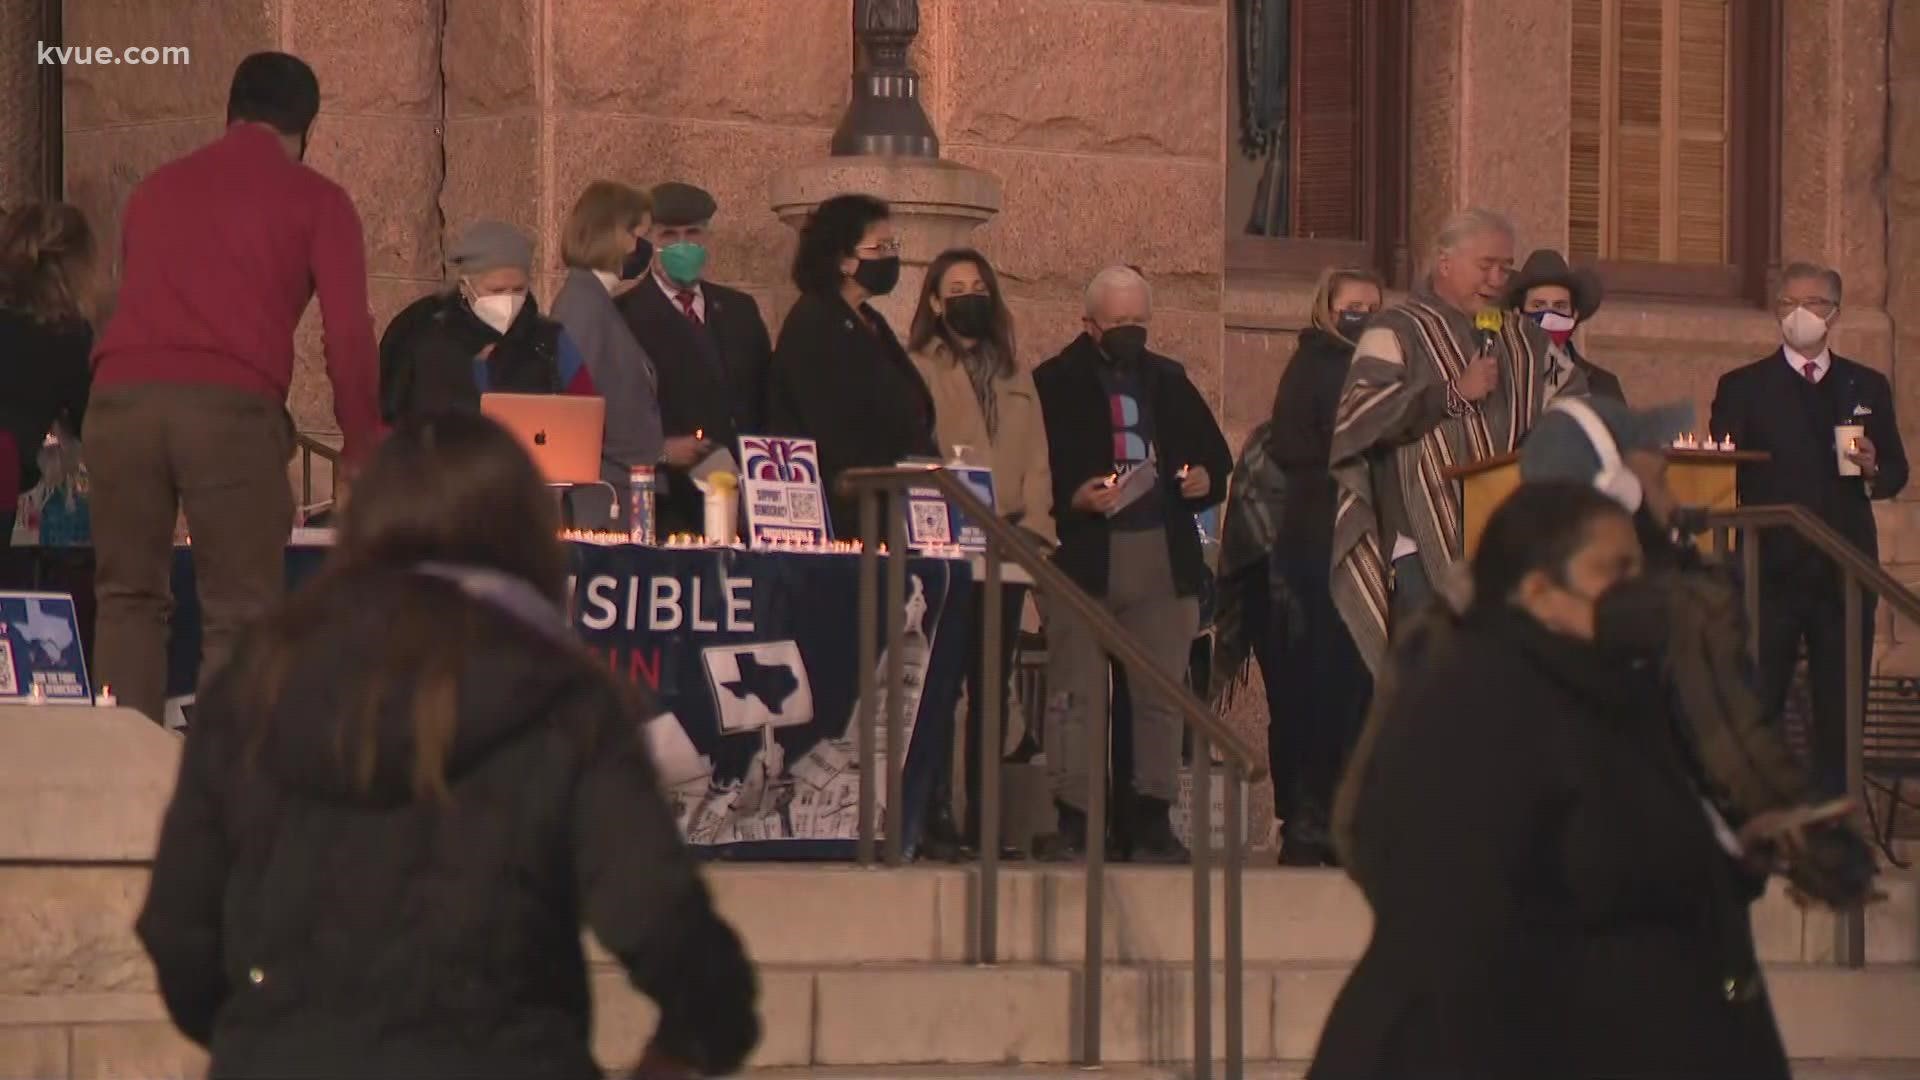 People gathered at the Texas Capitol Thursday evening to mark the one-year anniversary of the attack at the U.S. Capitol.